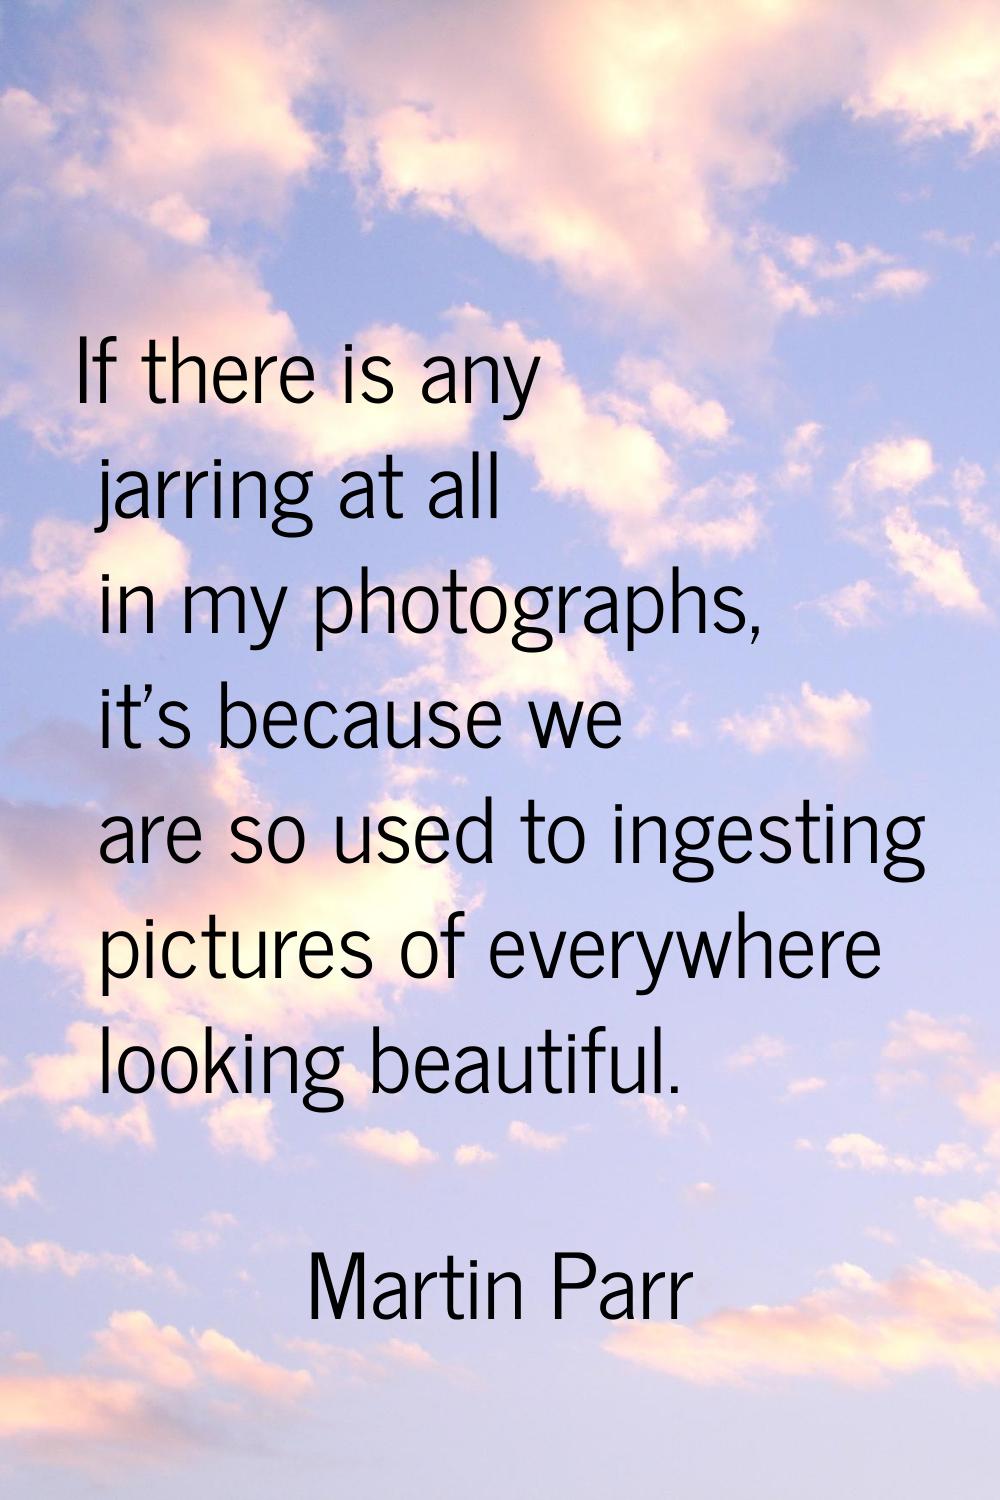 If there is any jarring at all in my photographs, it's because we are so used to ingesting pictures